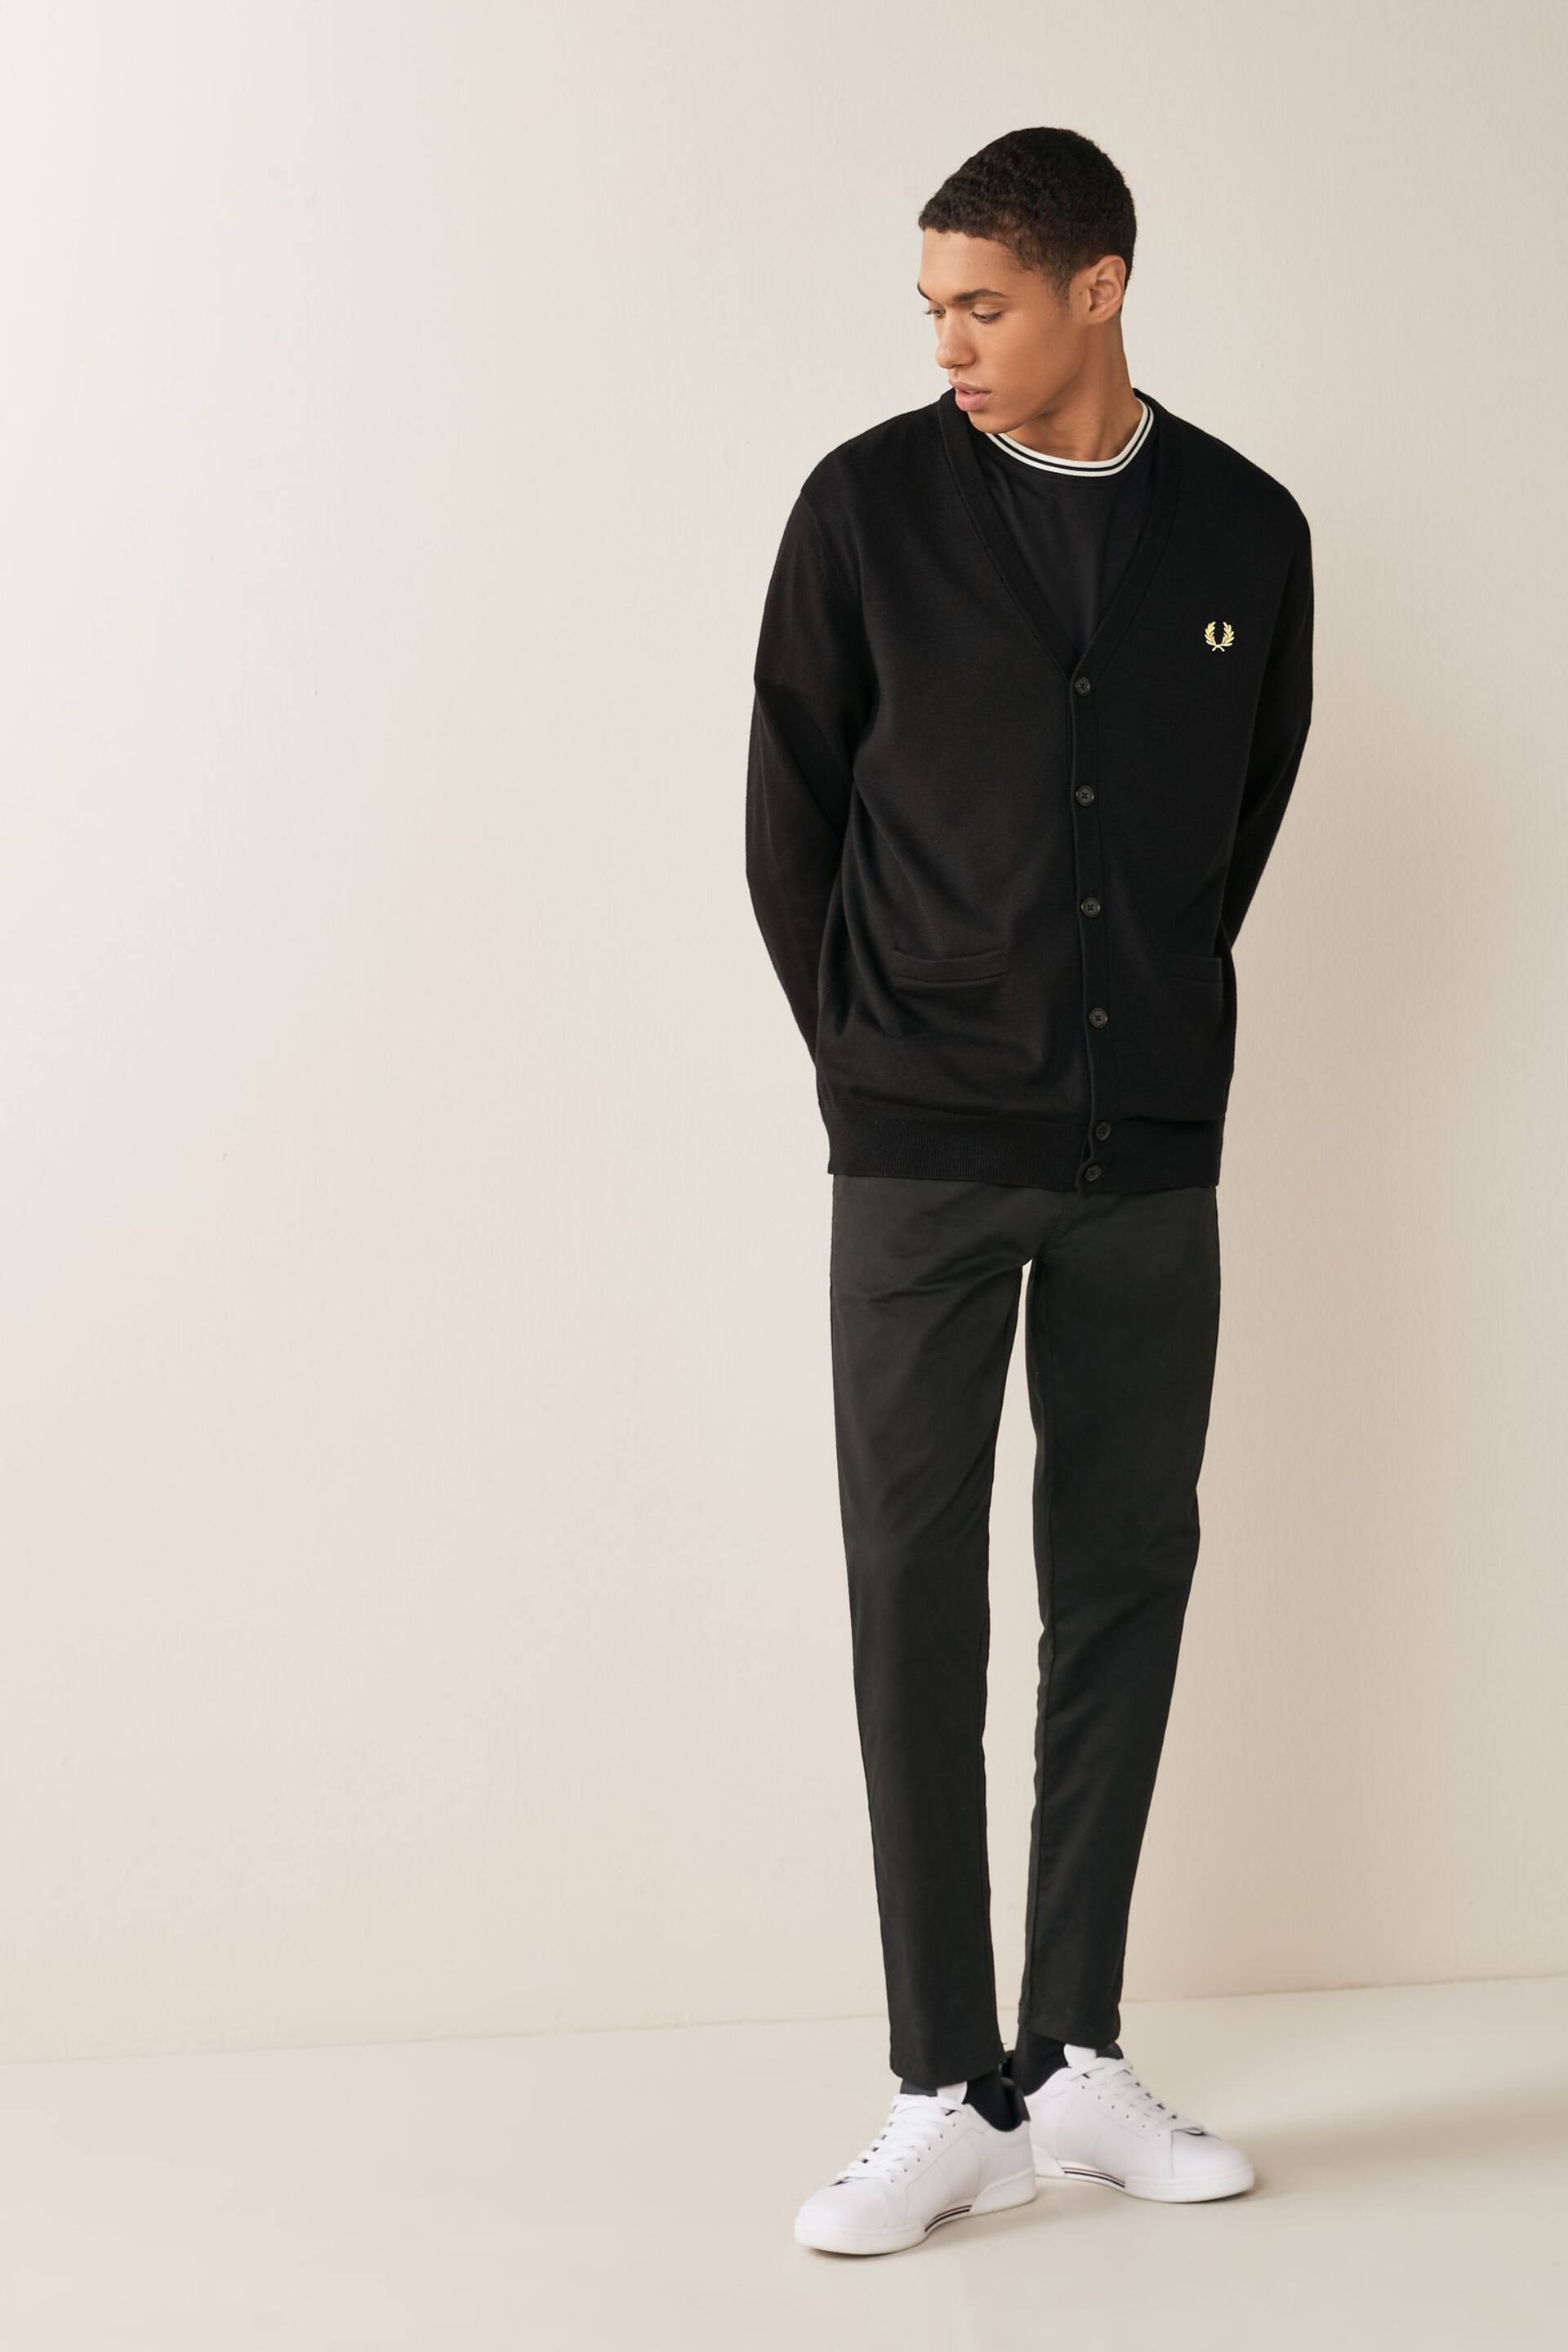 Fred Perry Classic Cardigan - Image 4 of 9